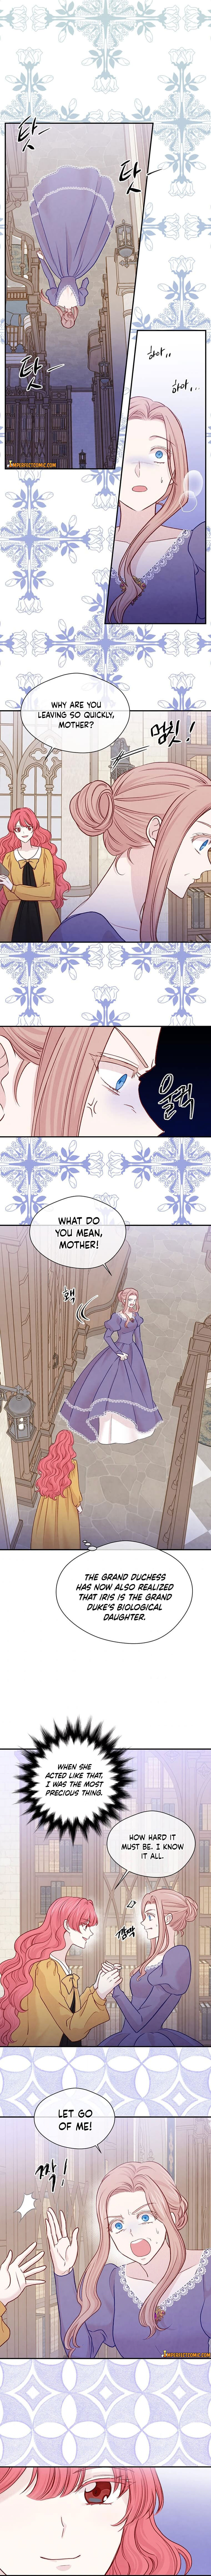 IRIS - Lady with a Smartphone Chapter 129 page 6